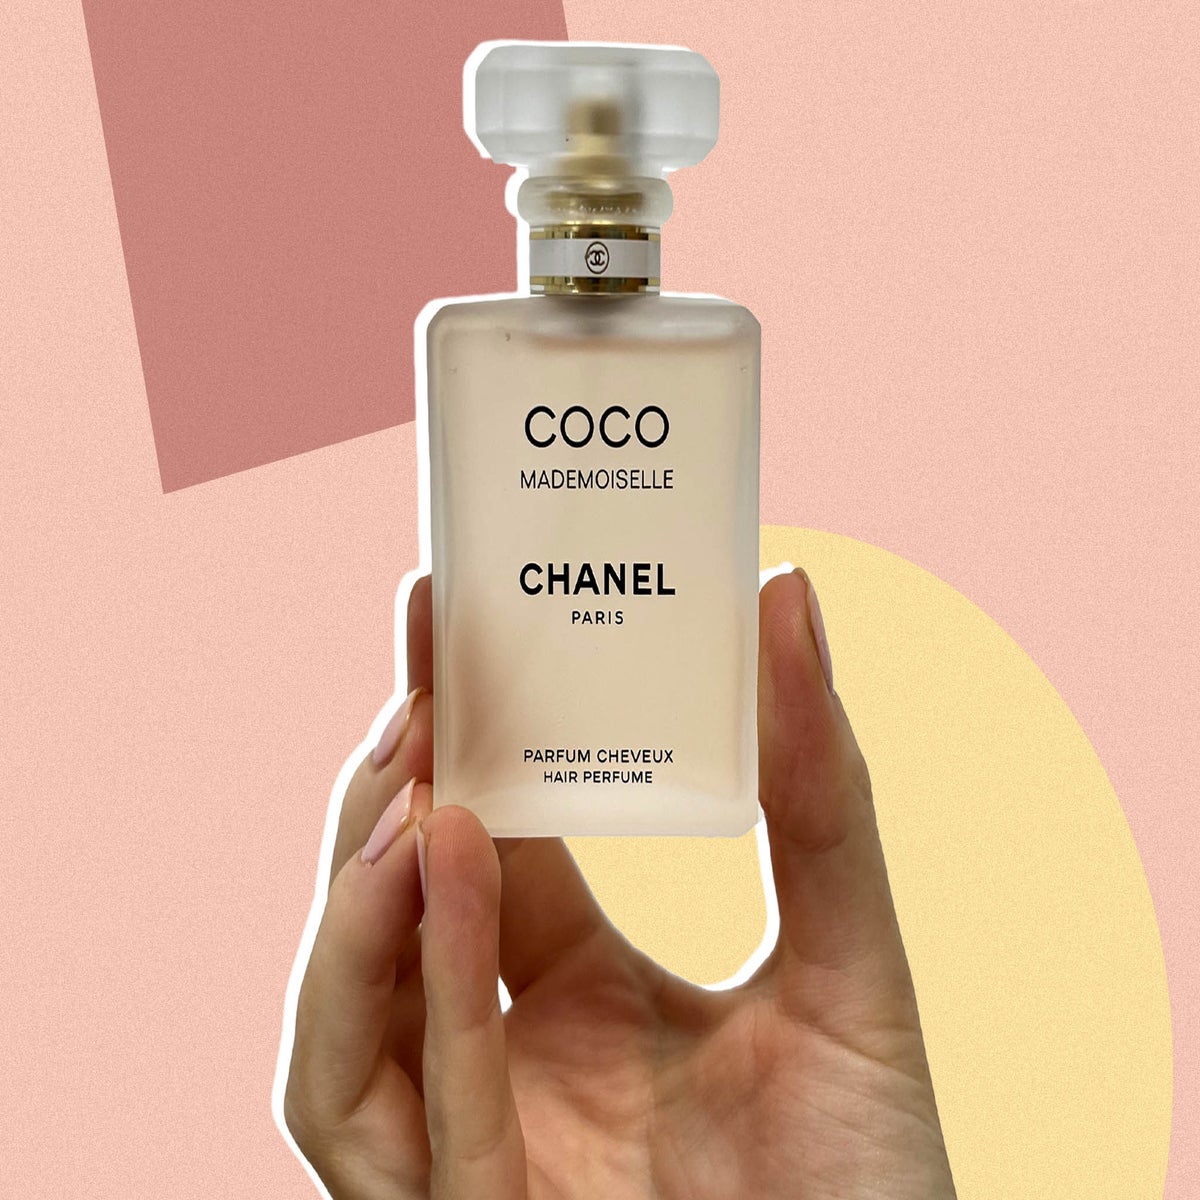 NEW! Coco Mademoiselle Hair Perfume #CHANEL, Shop with me at CHANEL i